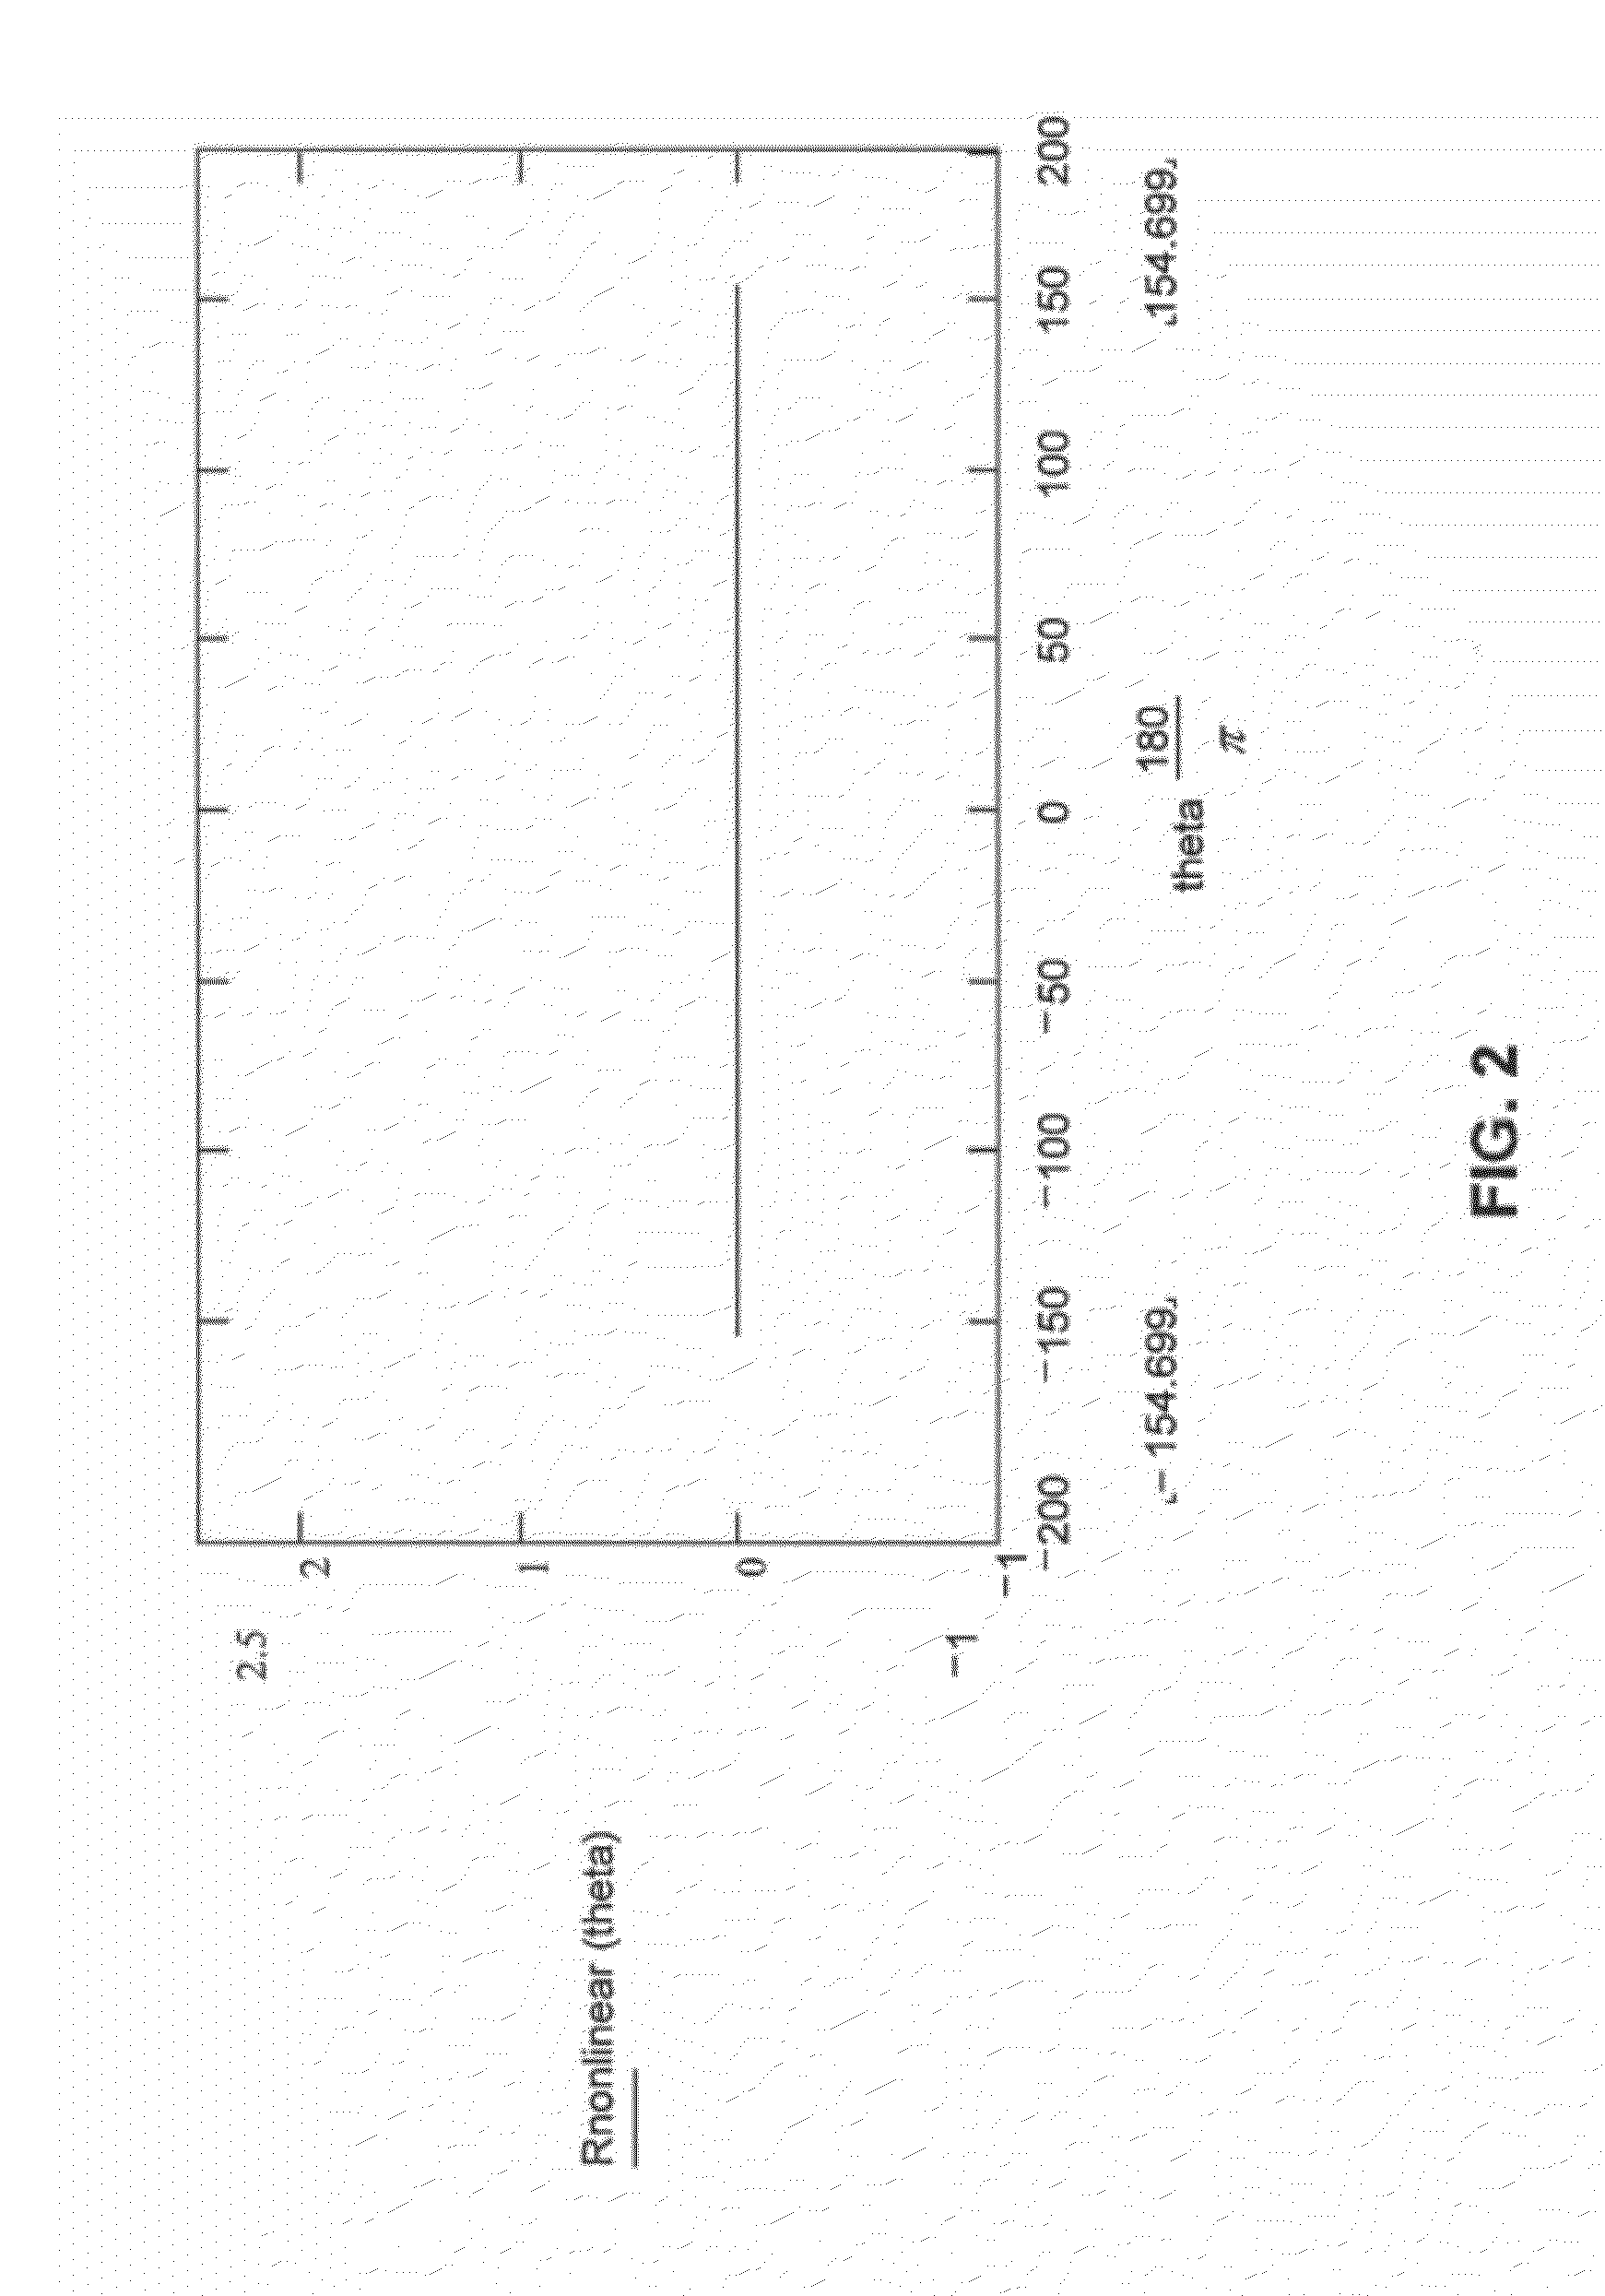 Systems and Methods of RF Power Transmission, Modulation, and Amplification, Including Varying Weights of Control Signals